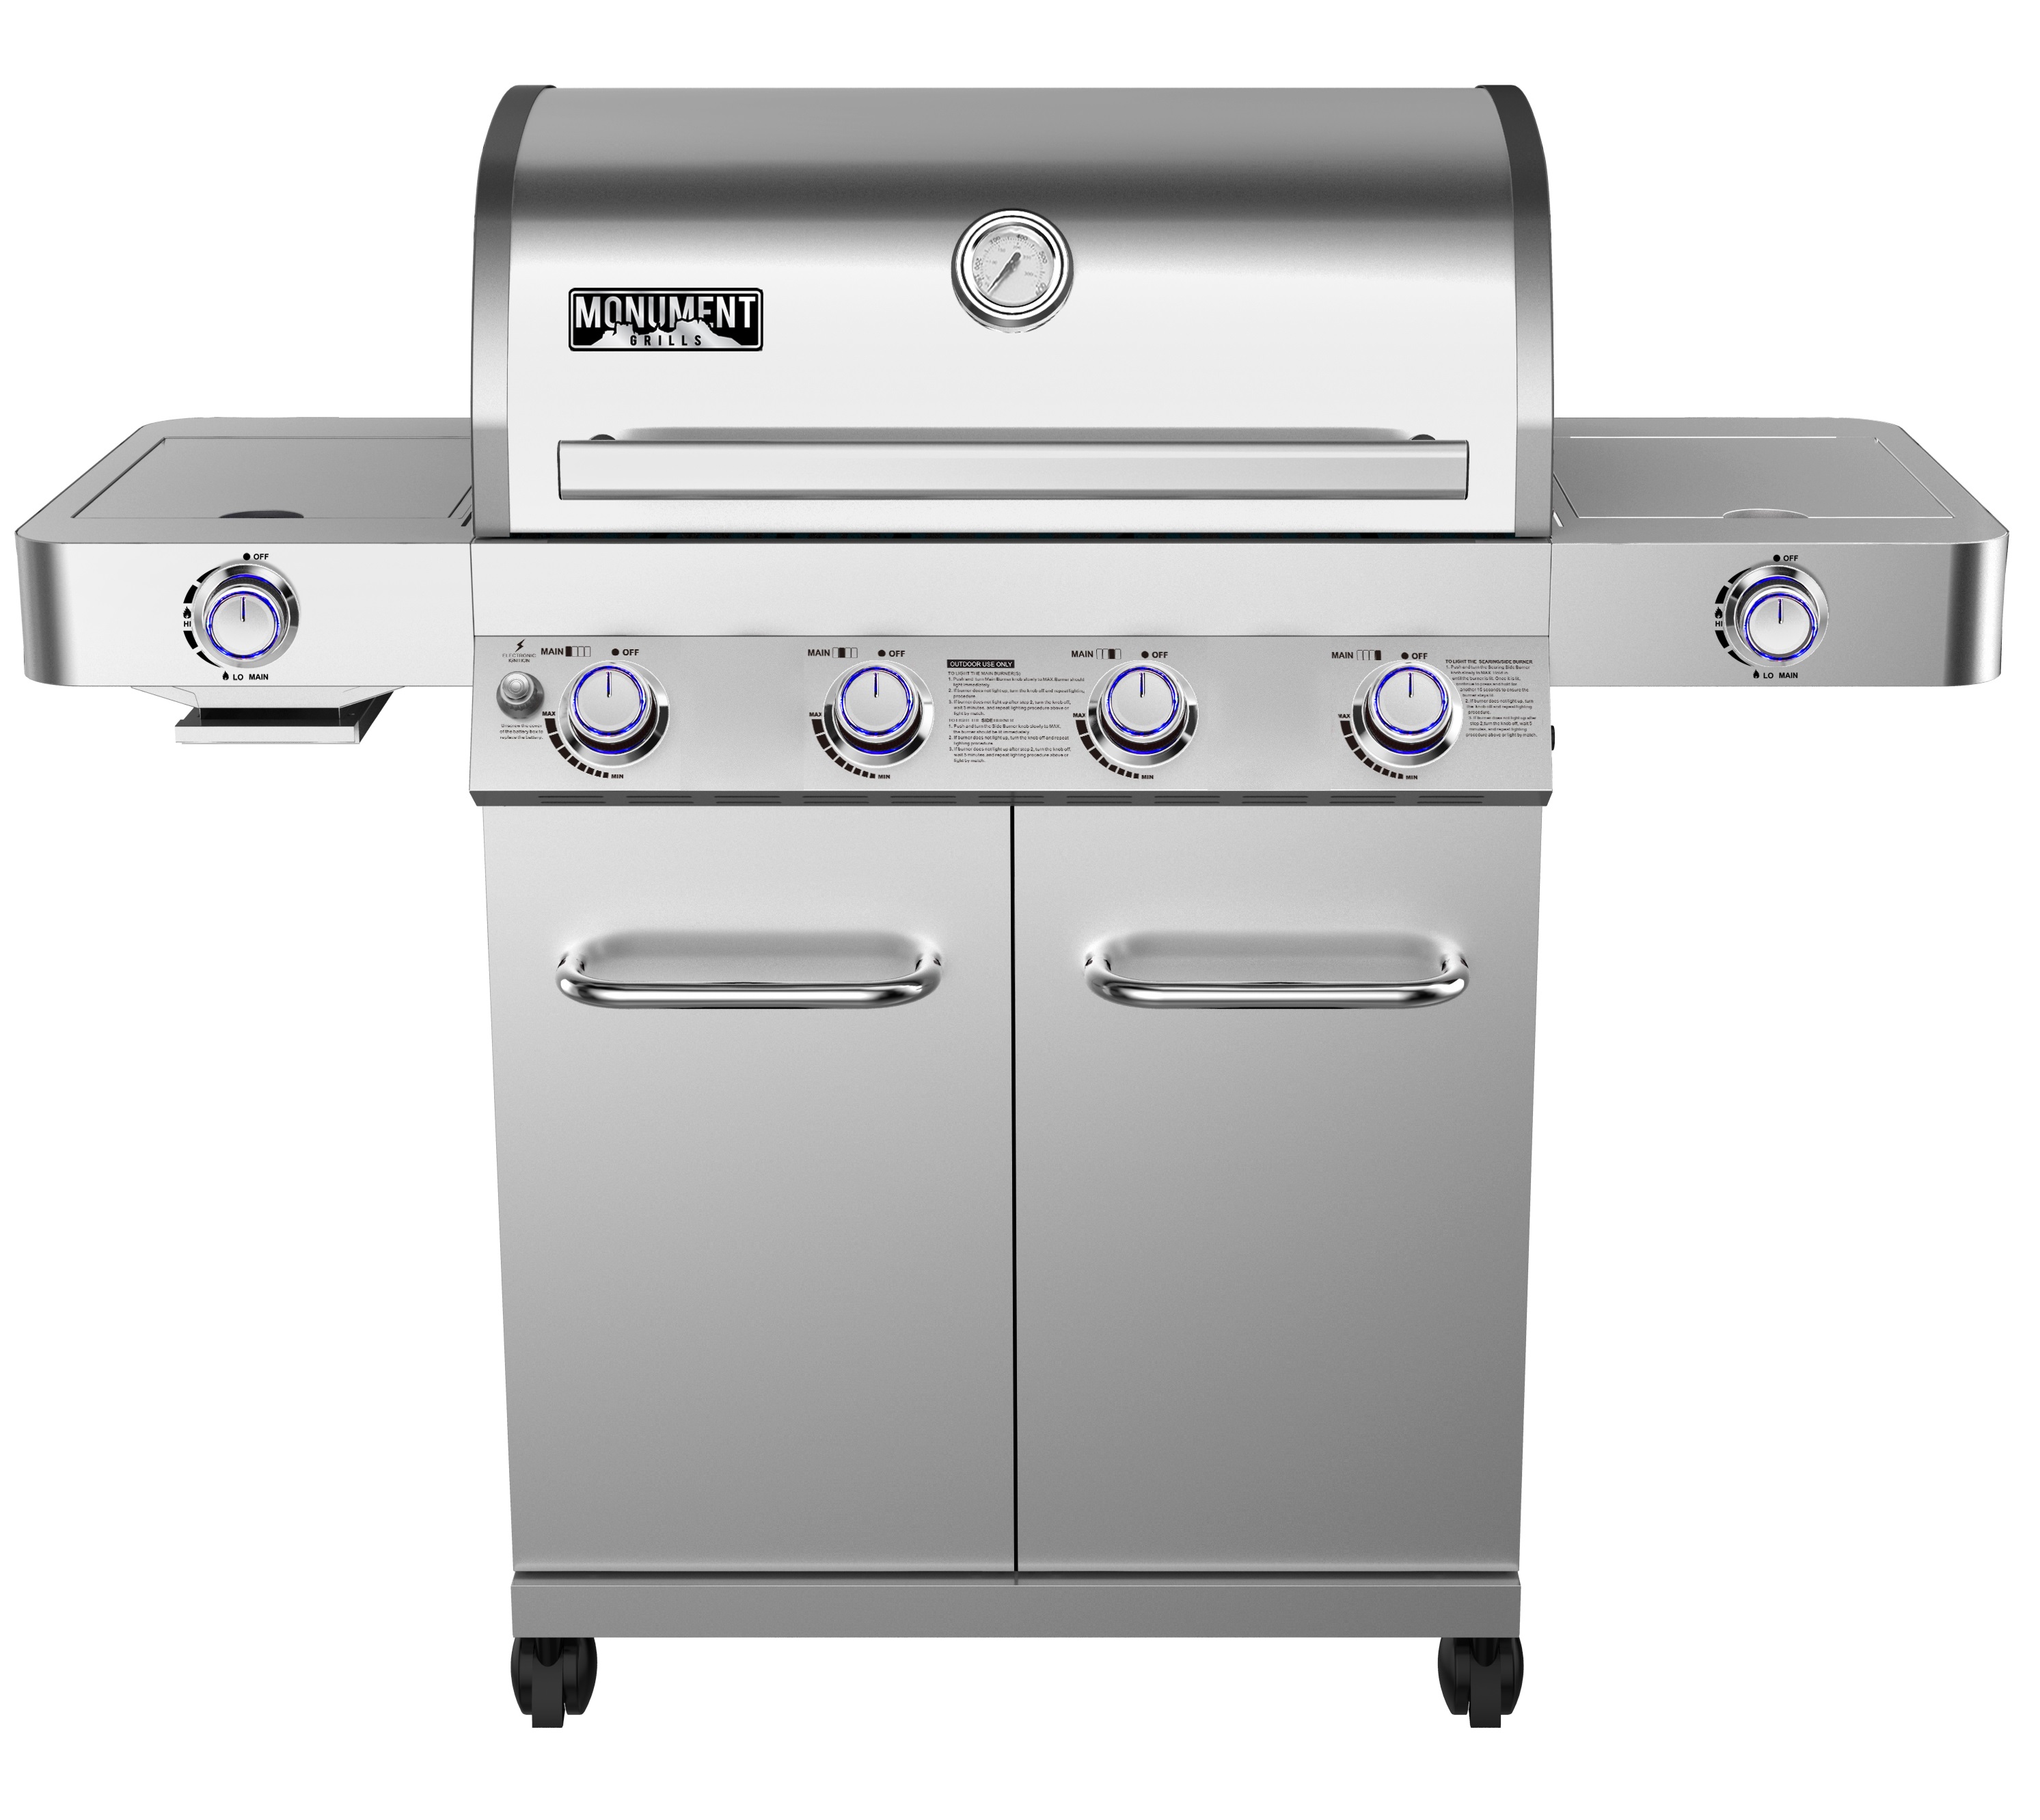 Monument Grills Stainless Steel 4 Burner Propane Gas Grill with Side Sear Burners